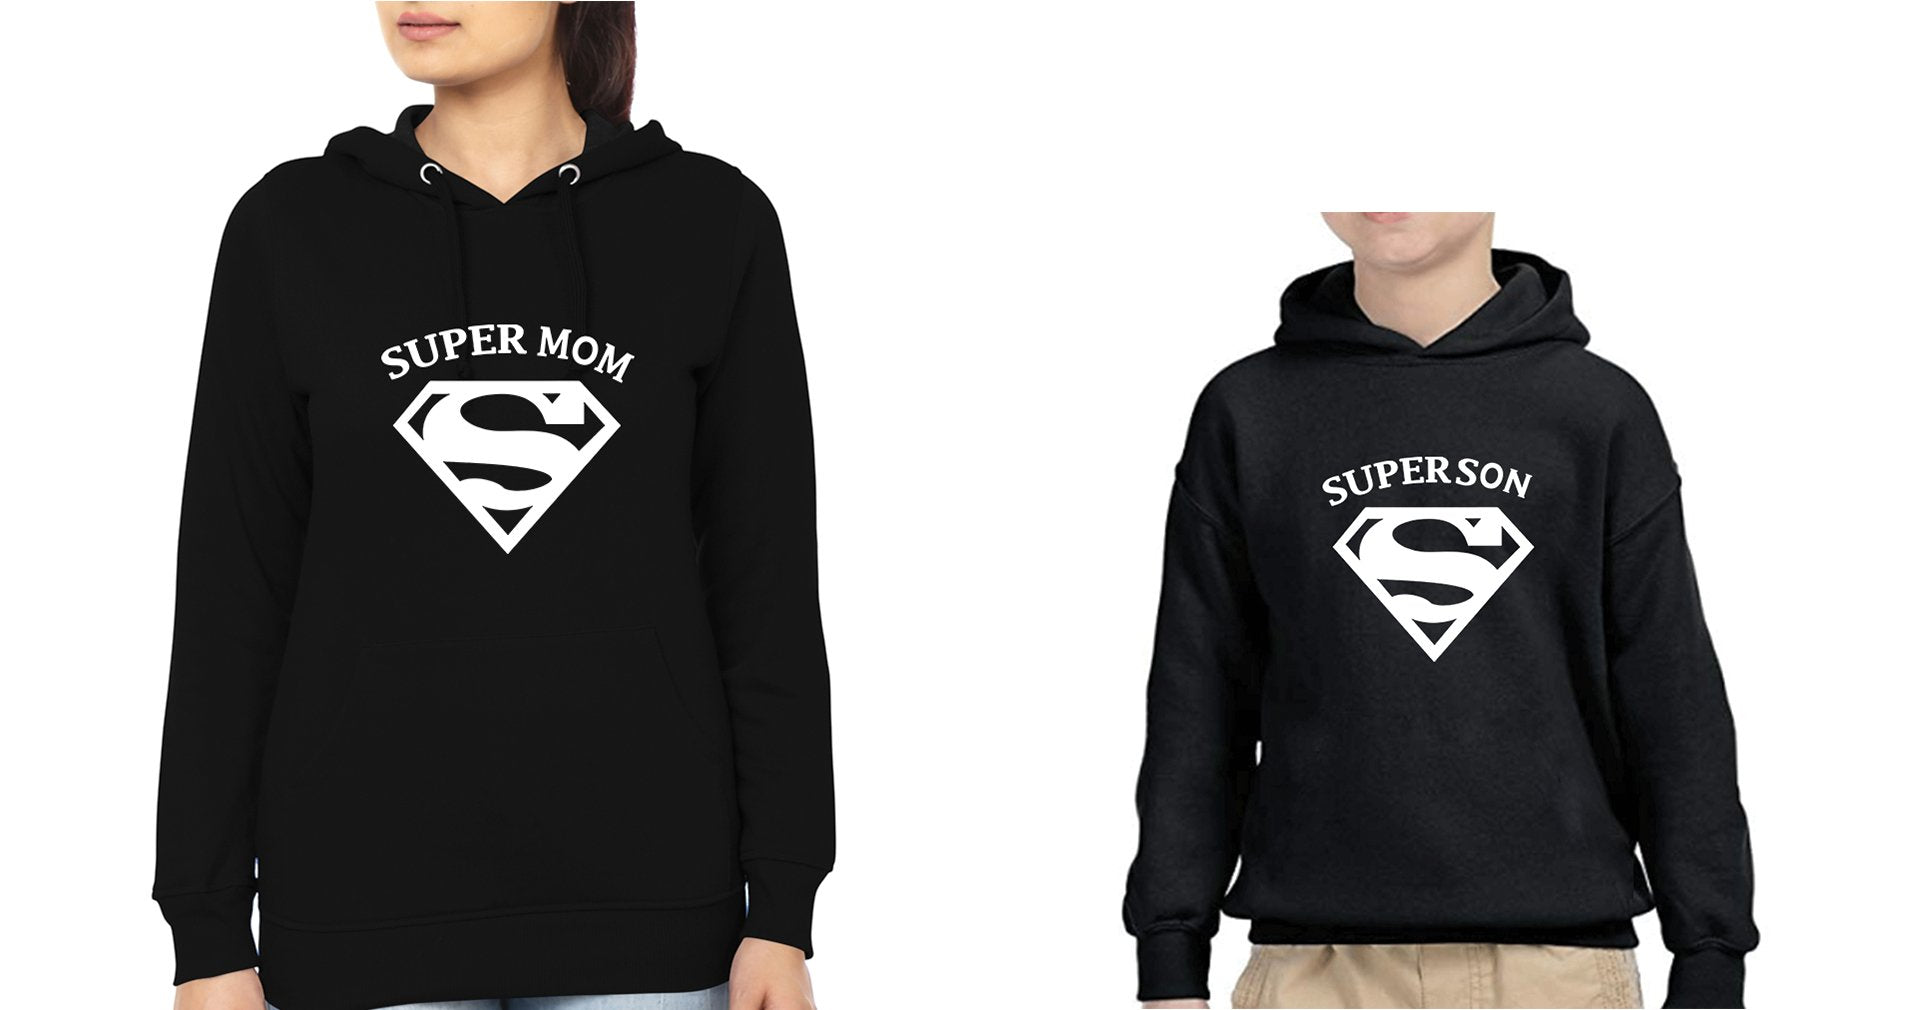 Super Mom Super Son Mother and Son Matching Hoodies- FunkyTradition